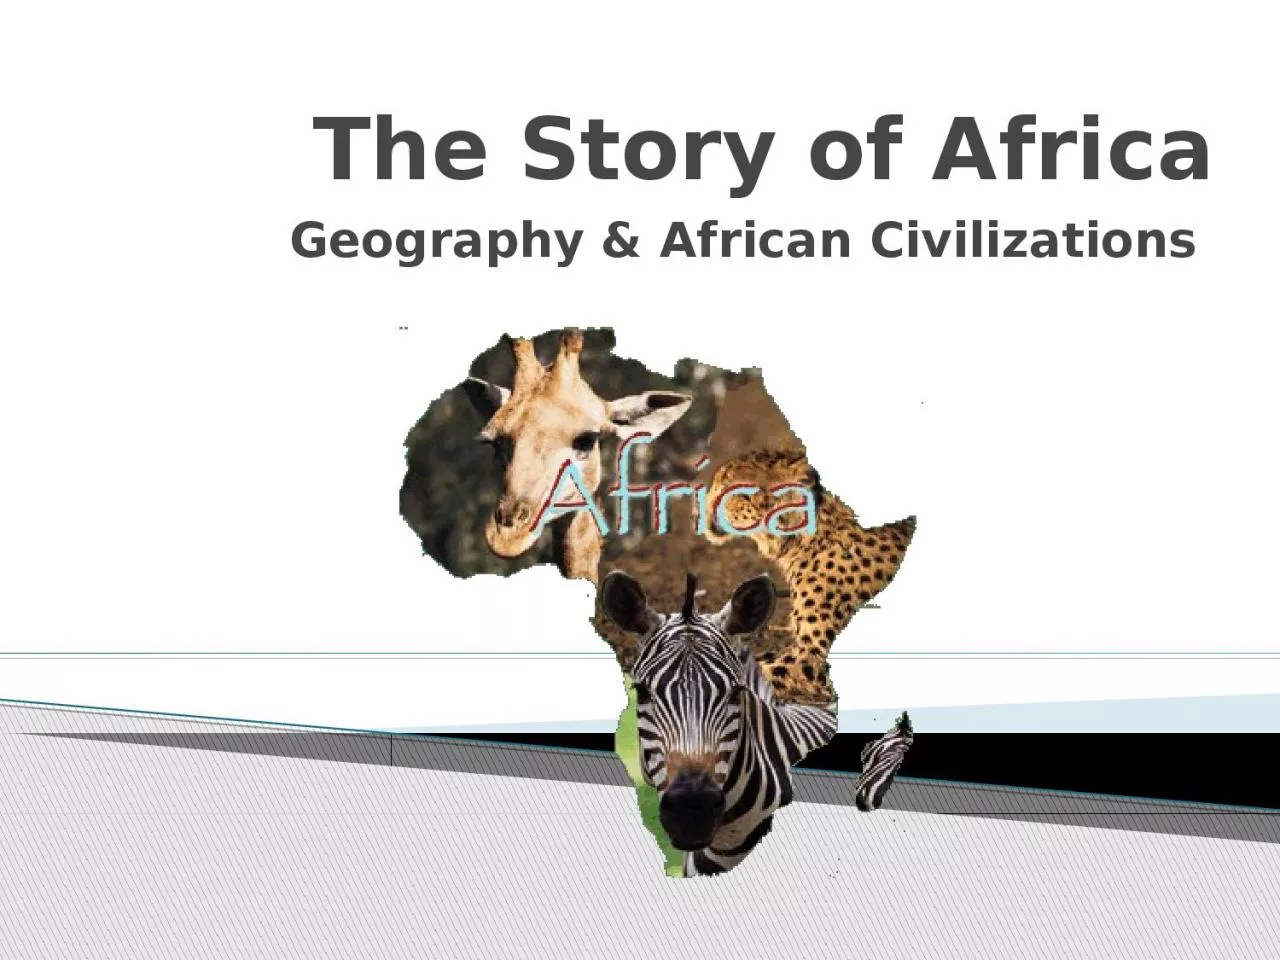 The Story of Africa Geography & African Civilizations